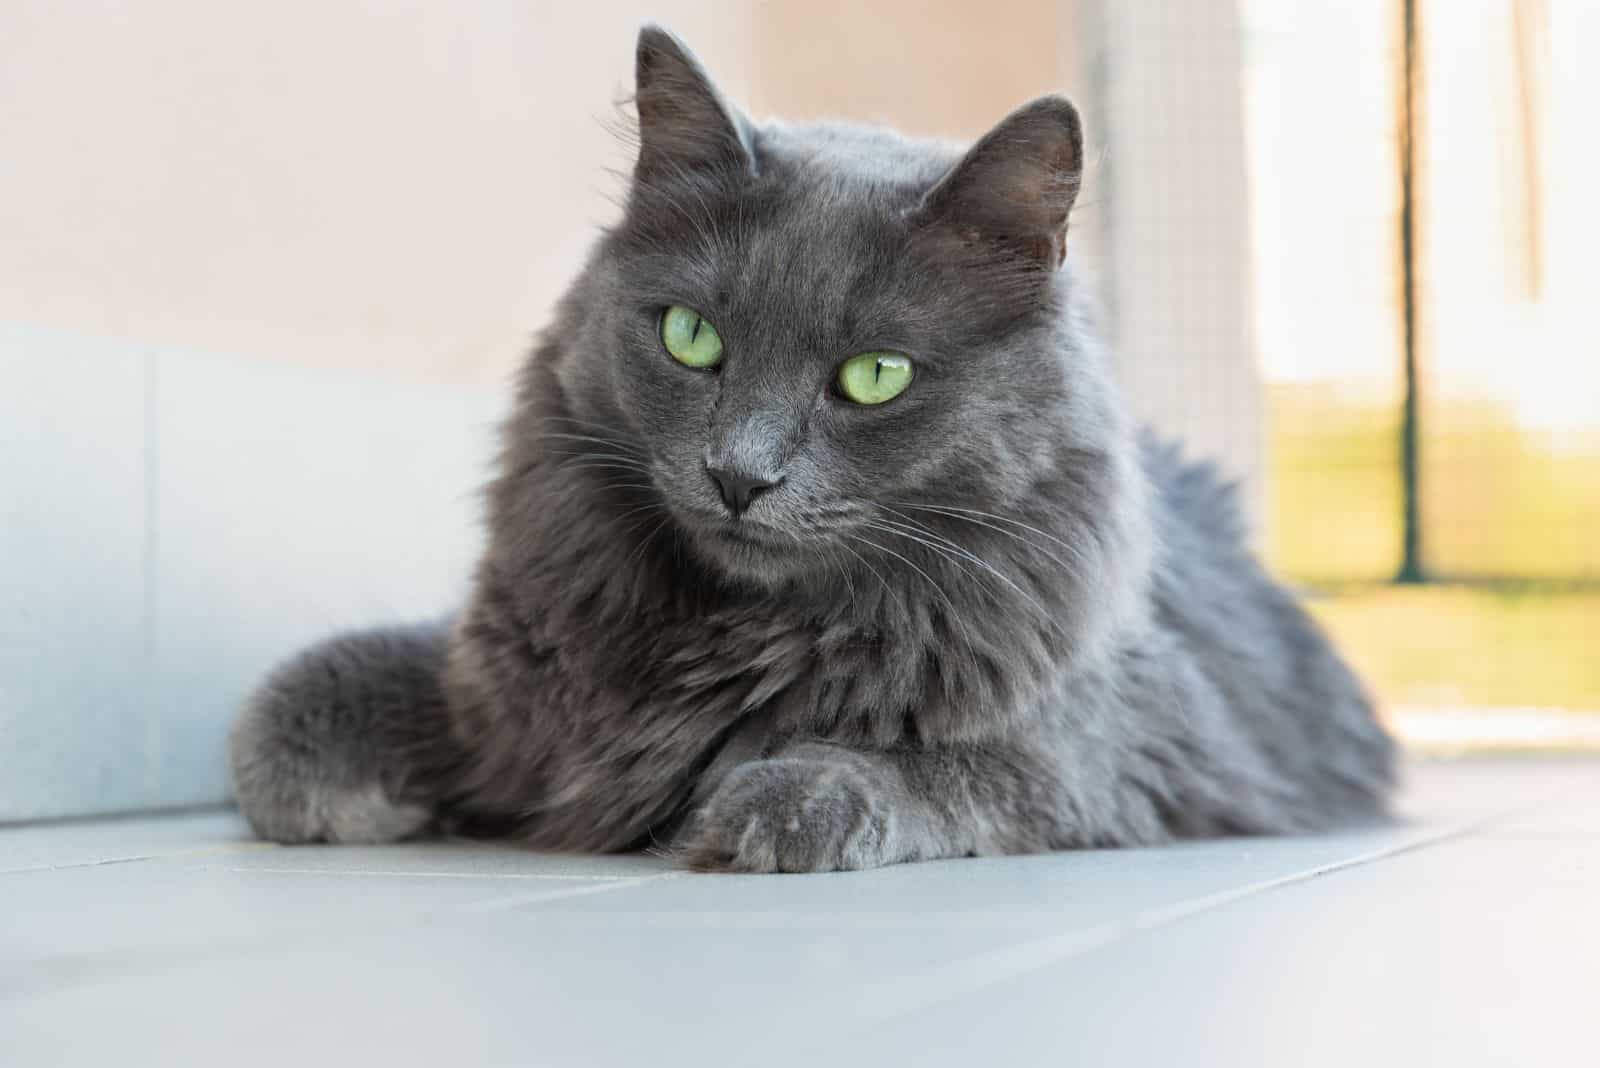 Nebelung cat with green eyes sitting on the pavement